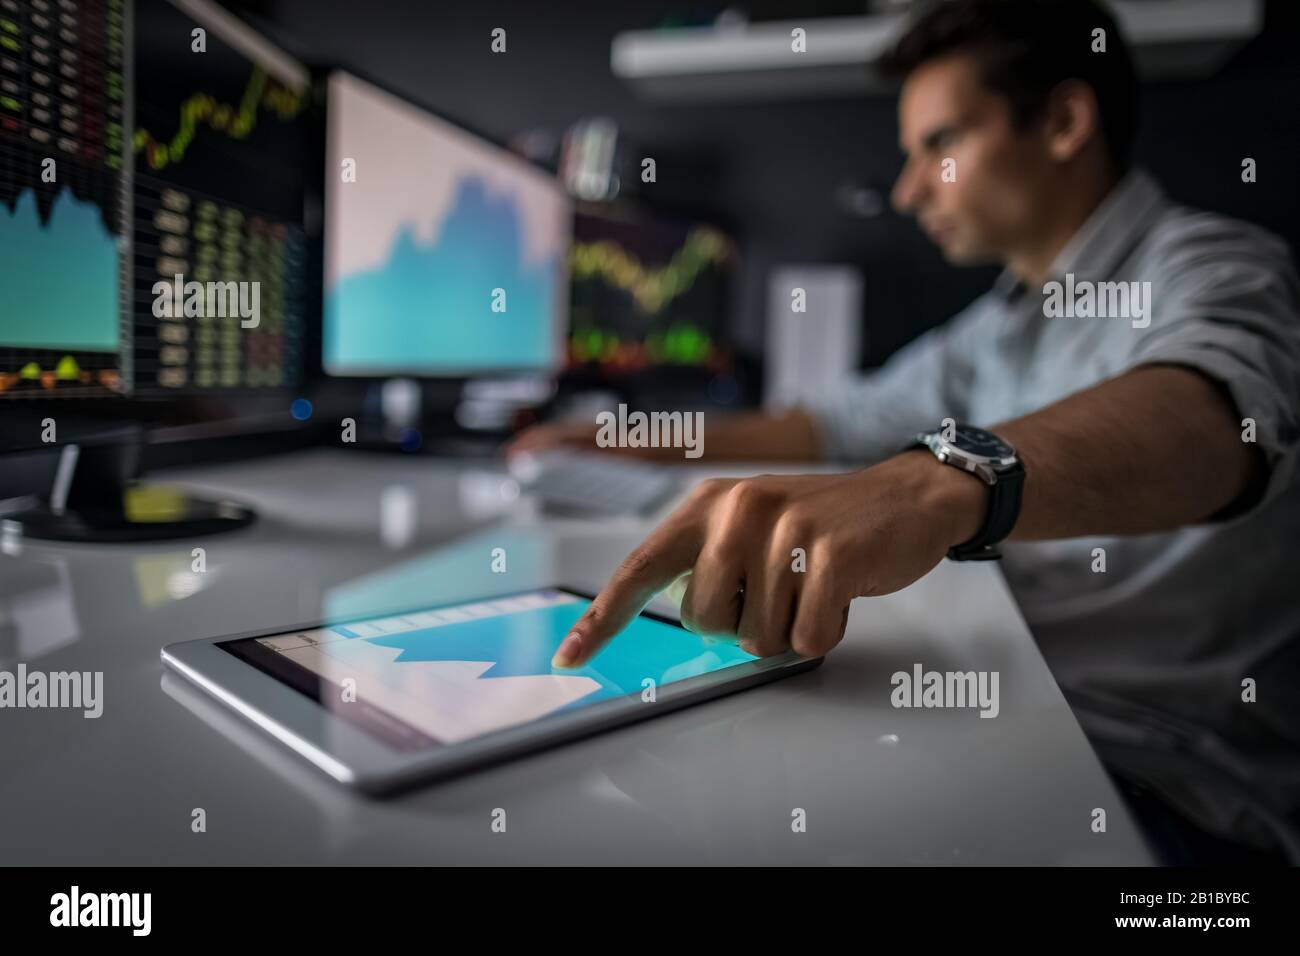 Analyzing data, graphs and reports for investment purposes. Developing new approaches. Stock Photo